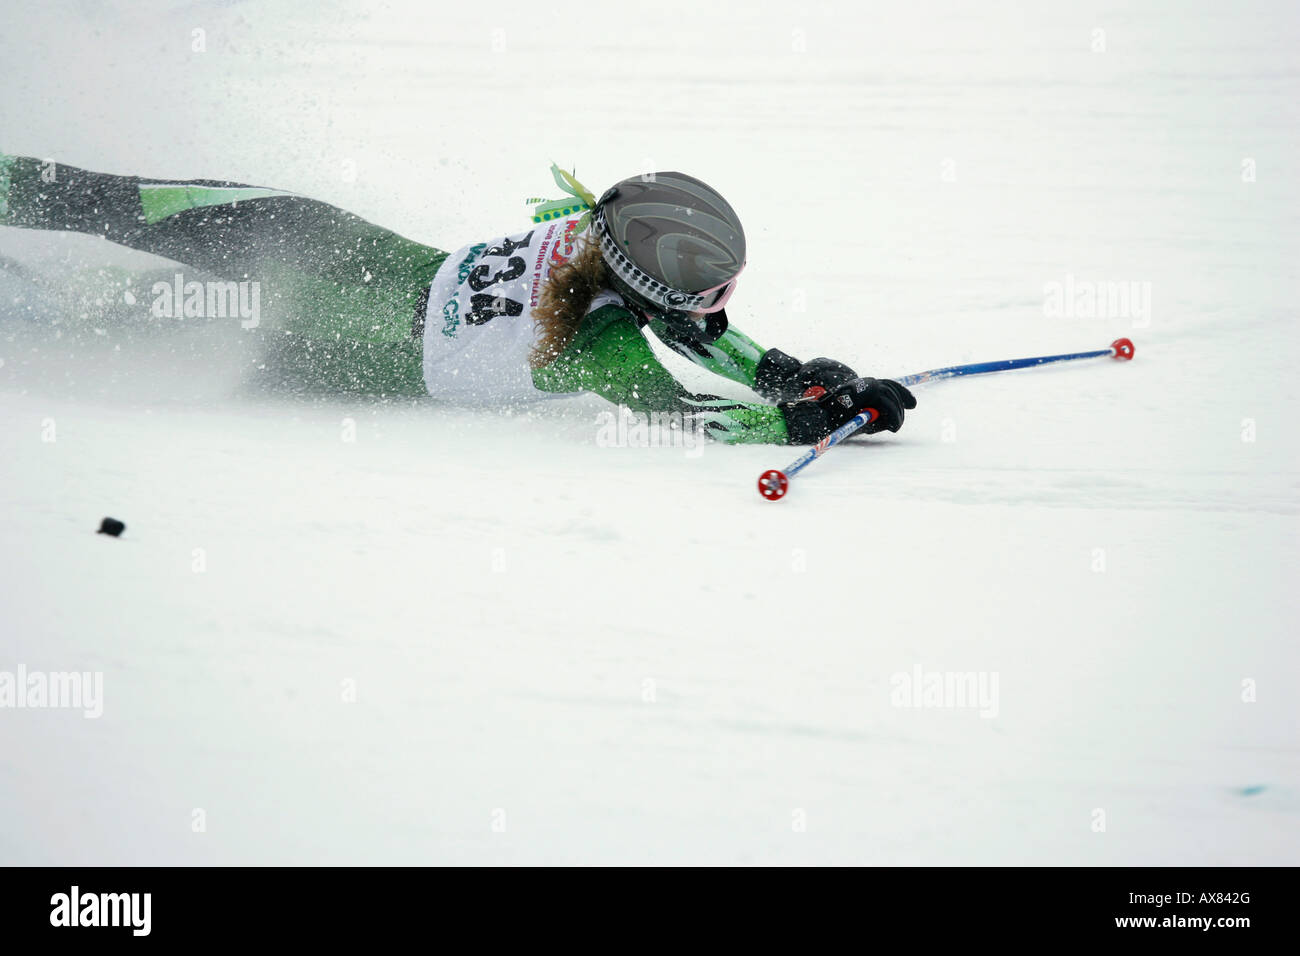 A snow skier falling during a giant slalom race. Stock Photo